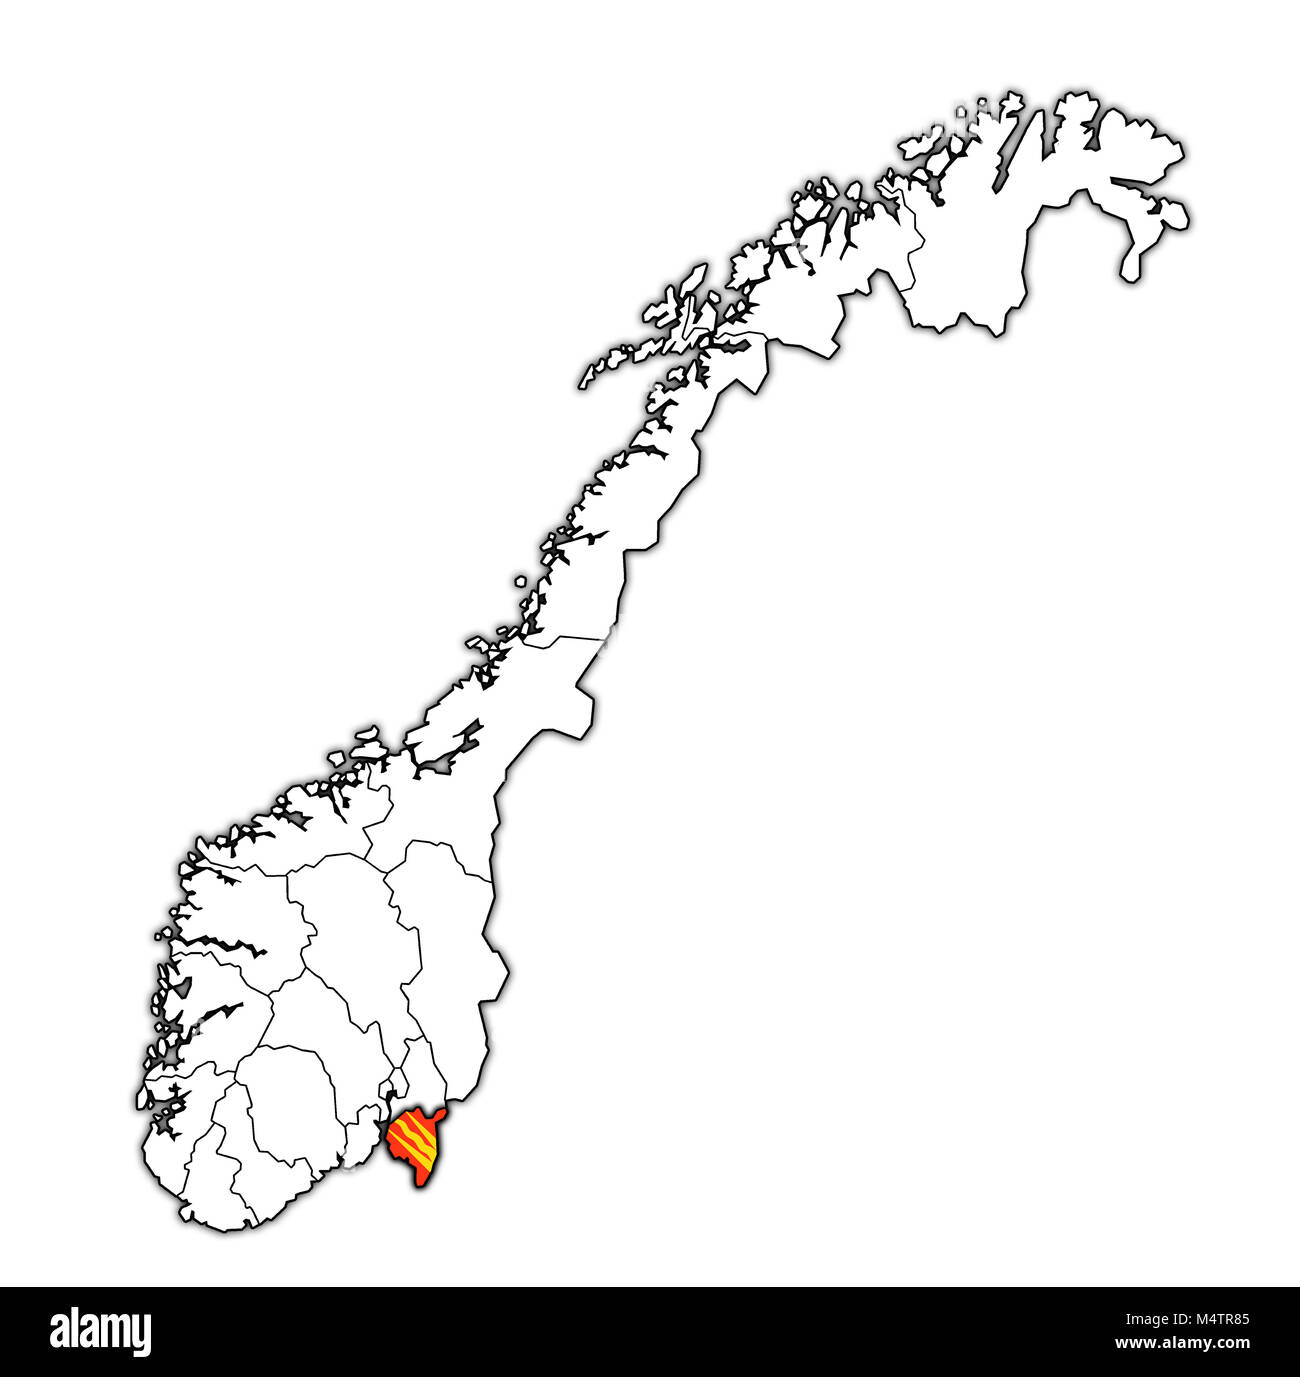 emblem of Ostfold county on map with administrative divisions and borders of norway Stock Photo